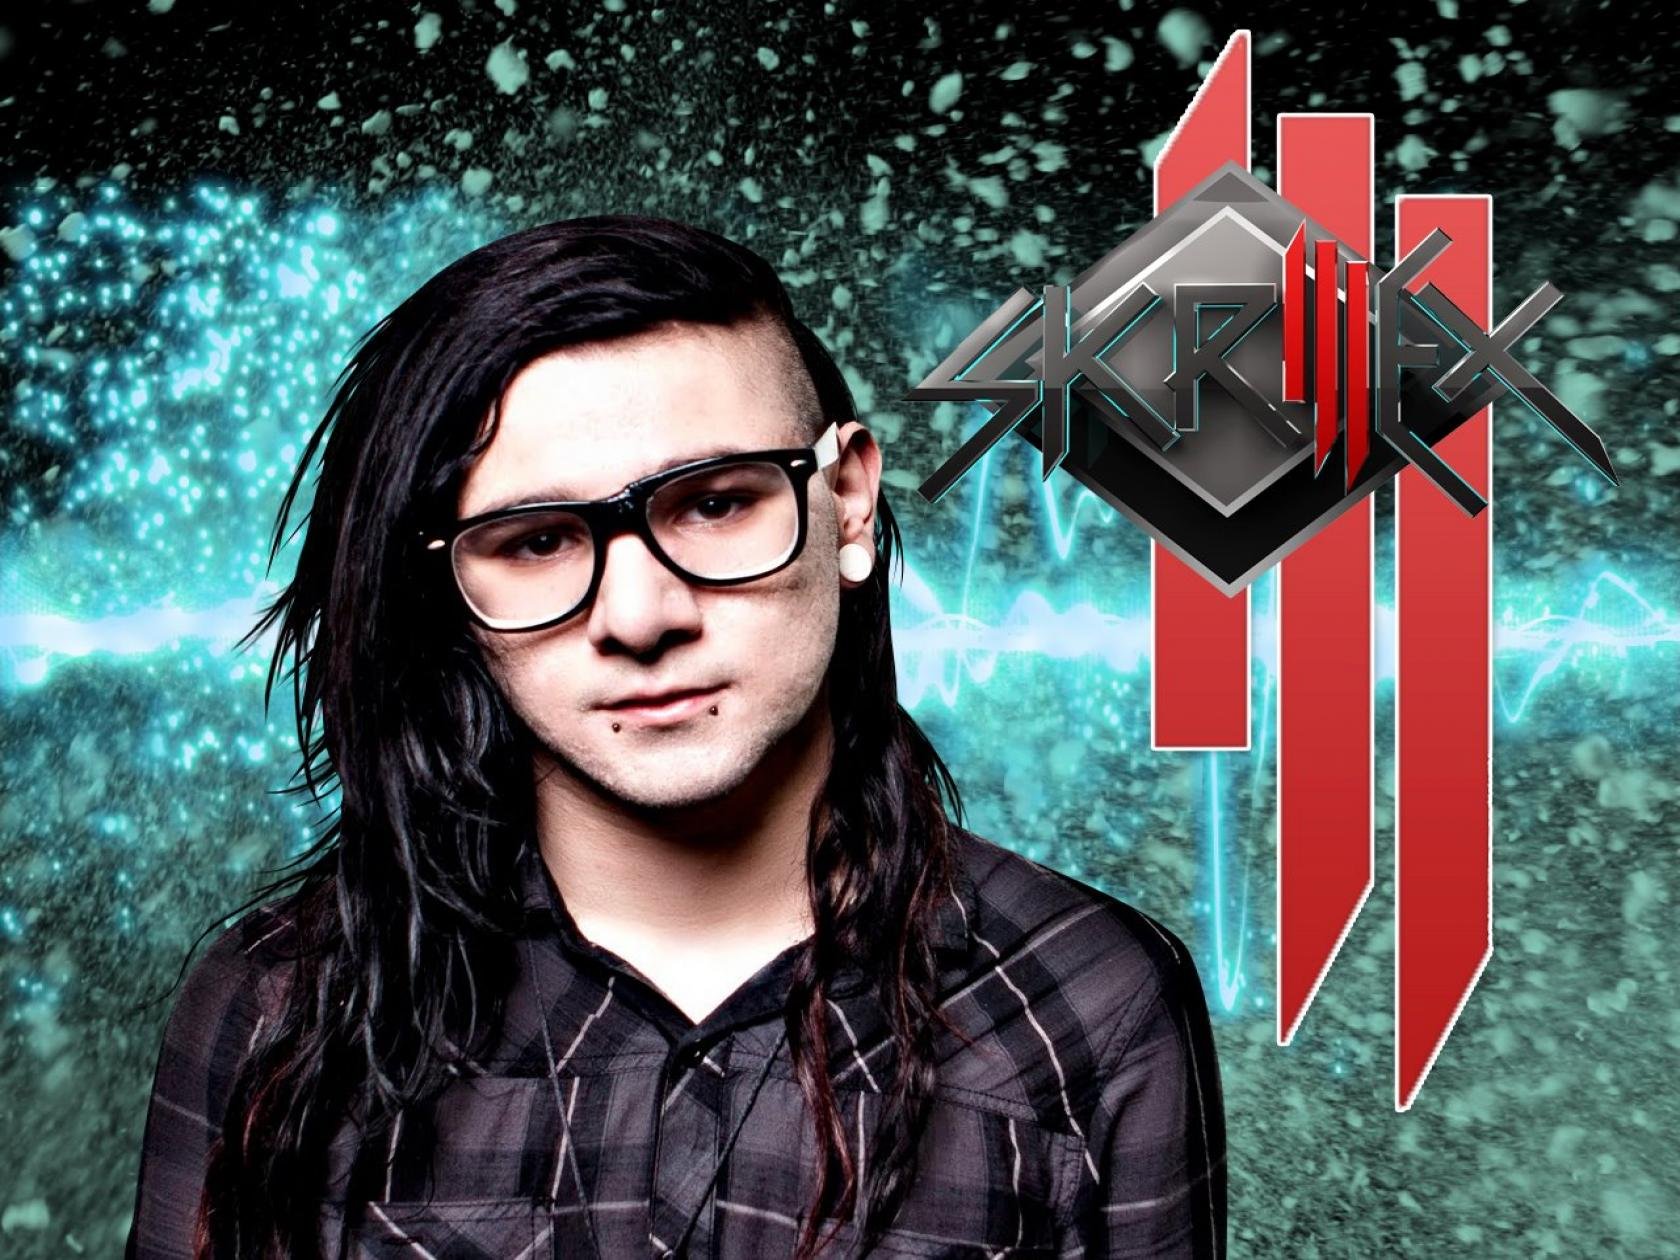 Download hd wallpapers of 980434-skrillex, Dubstep, Electro, House, Dance, ...